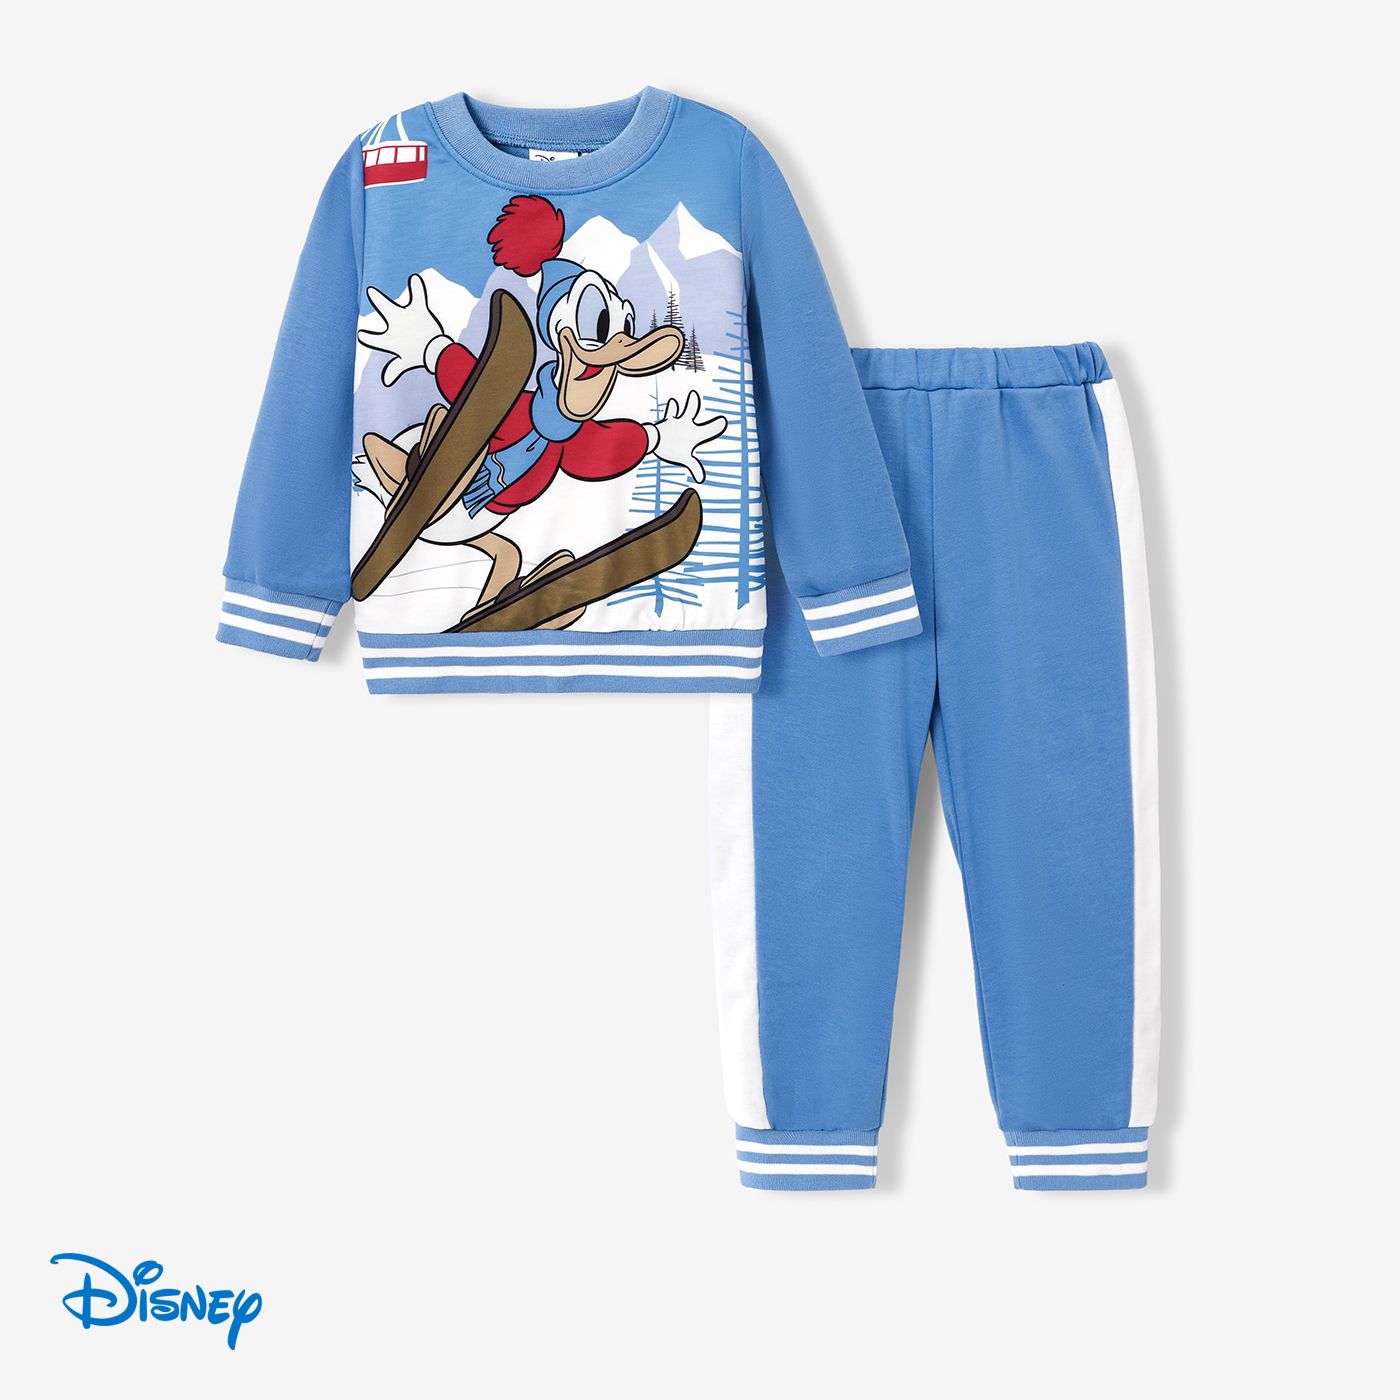 Disney Mickey And Friends Toddler Boy 2pcs Christmas Character Print Top And Pants Set